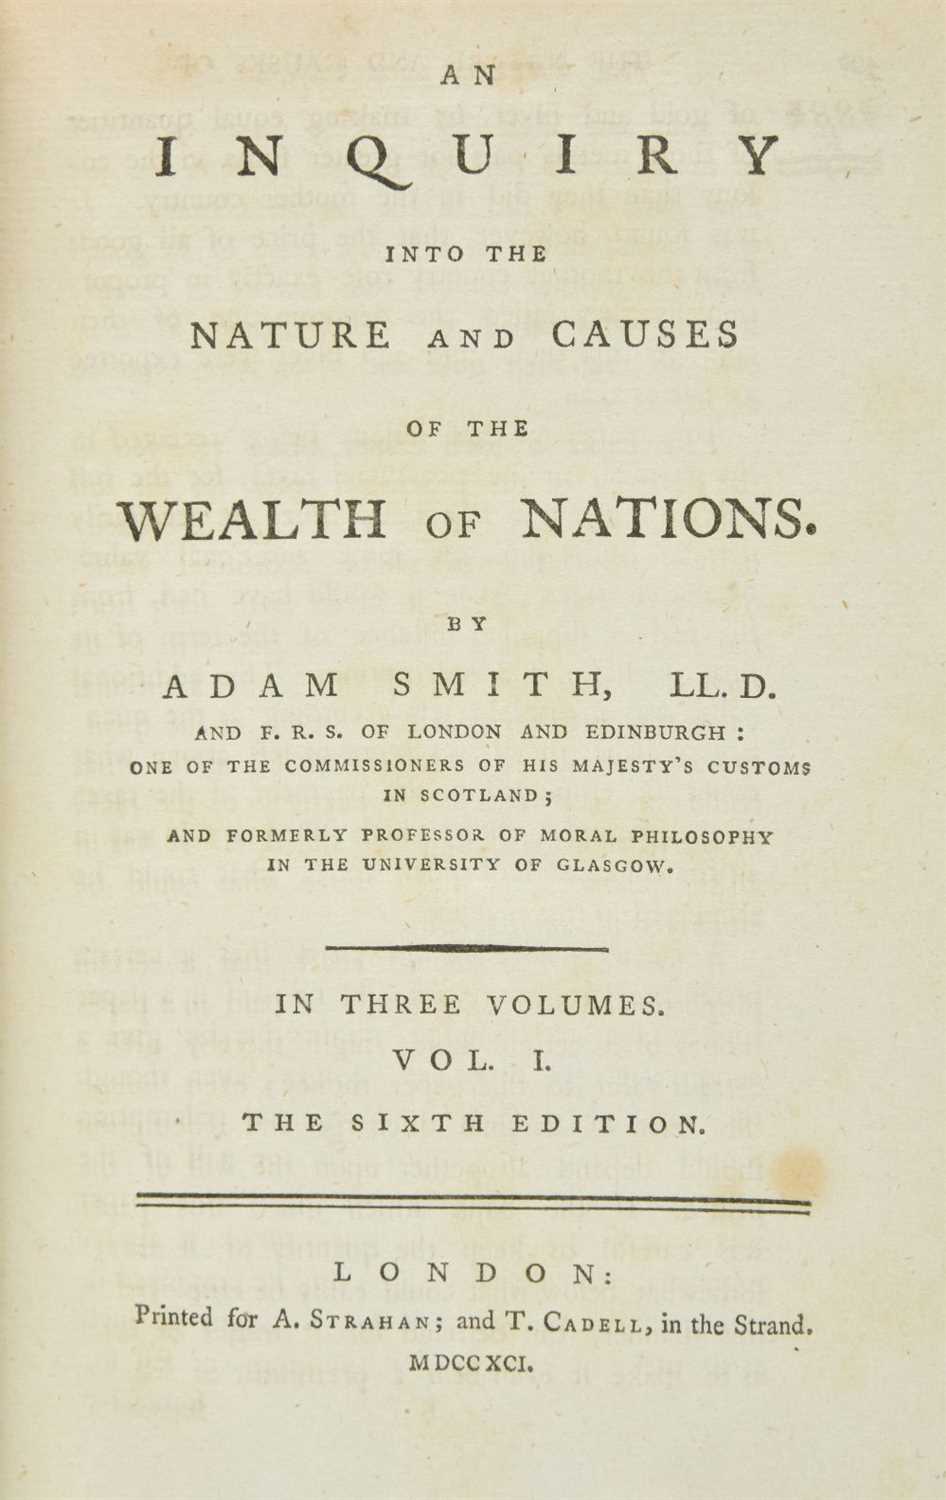 Lot 336 - Smith (Adam). An Inquiry into the Nature and Causes of the Wealth of Nations, 3 volumes, 1791